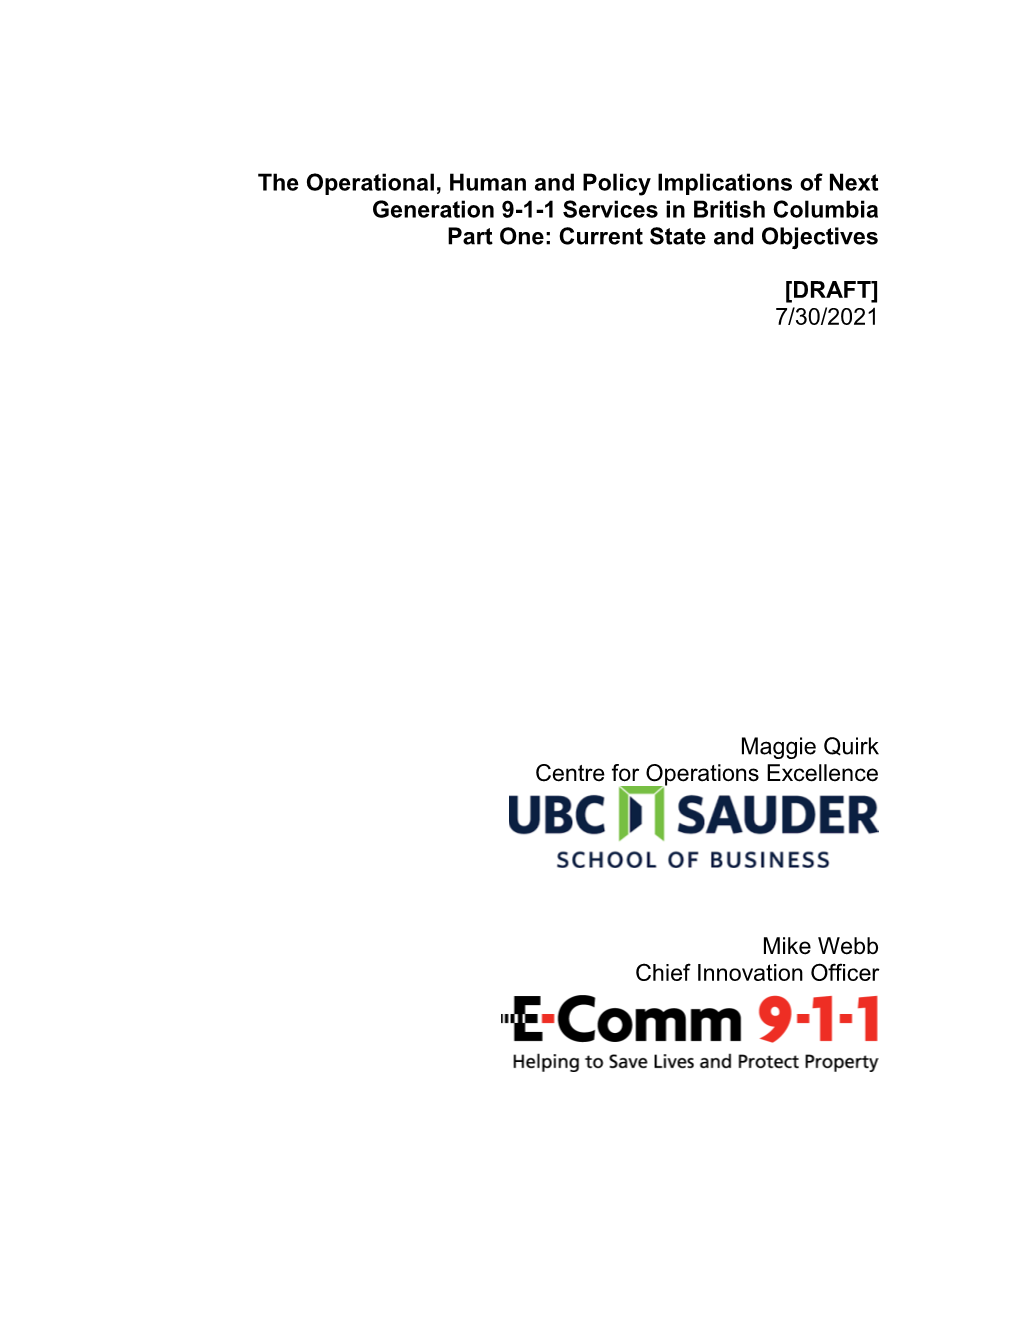 The Operational, Human and Policy Implications of Next Generation 9-1-1 Services in British Columbia Part One: Current State and Objectives